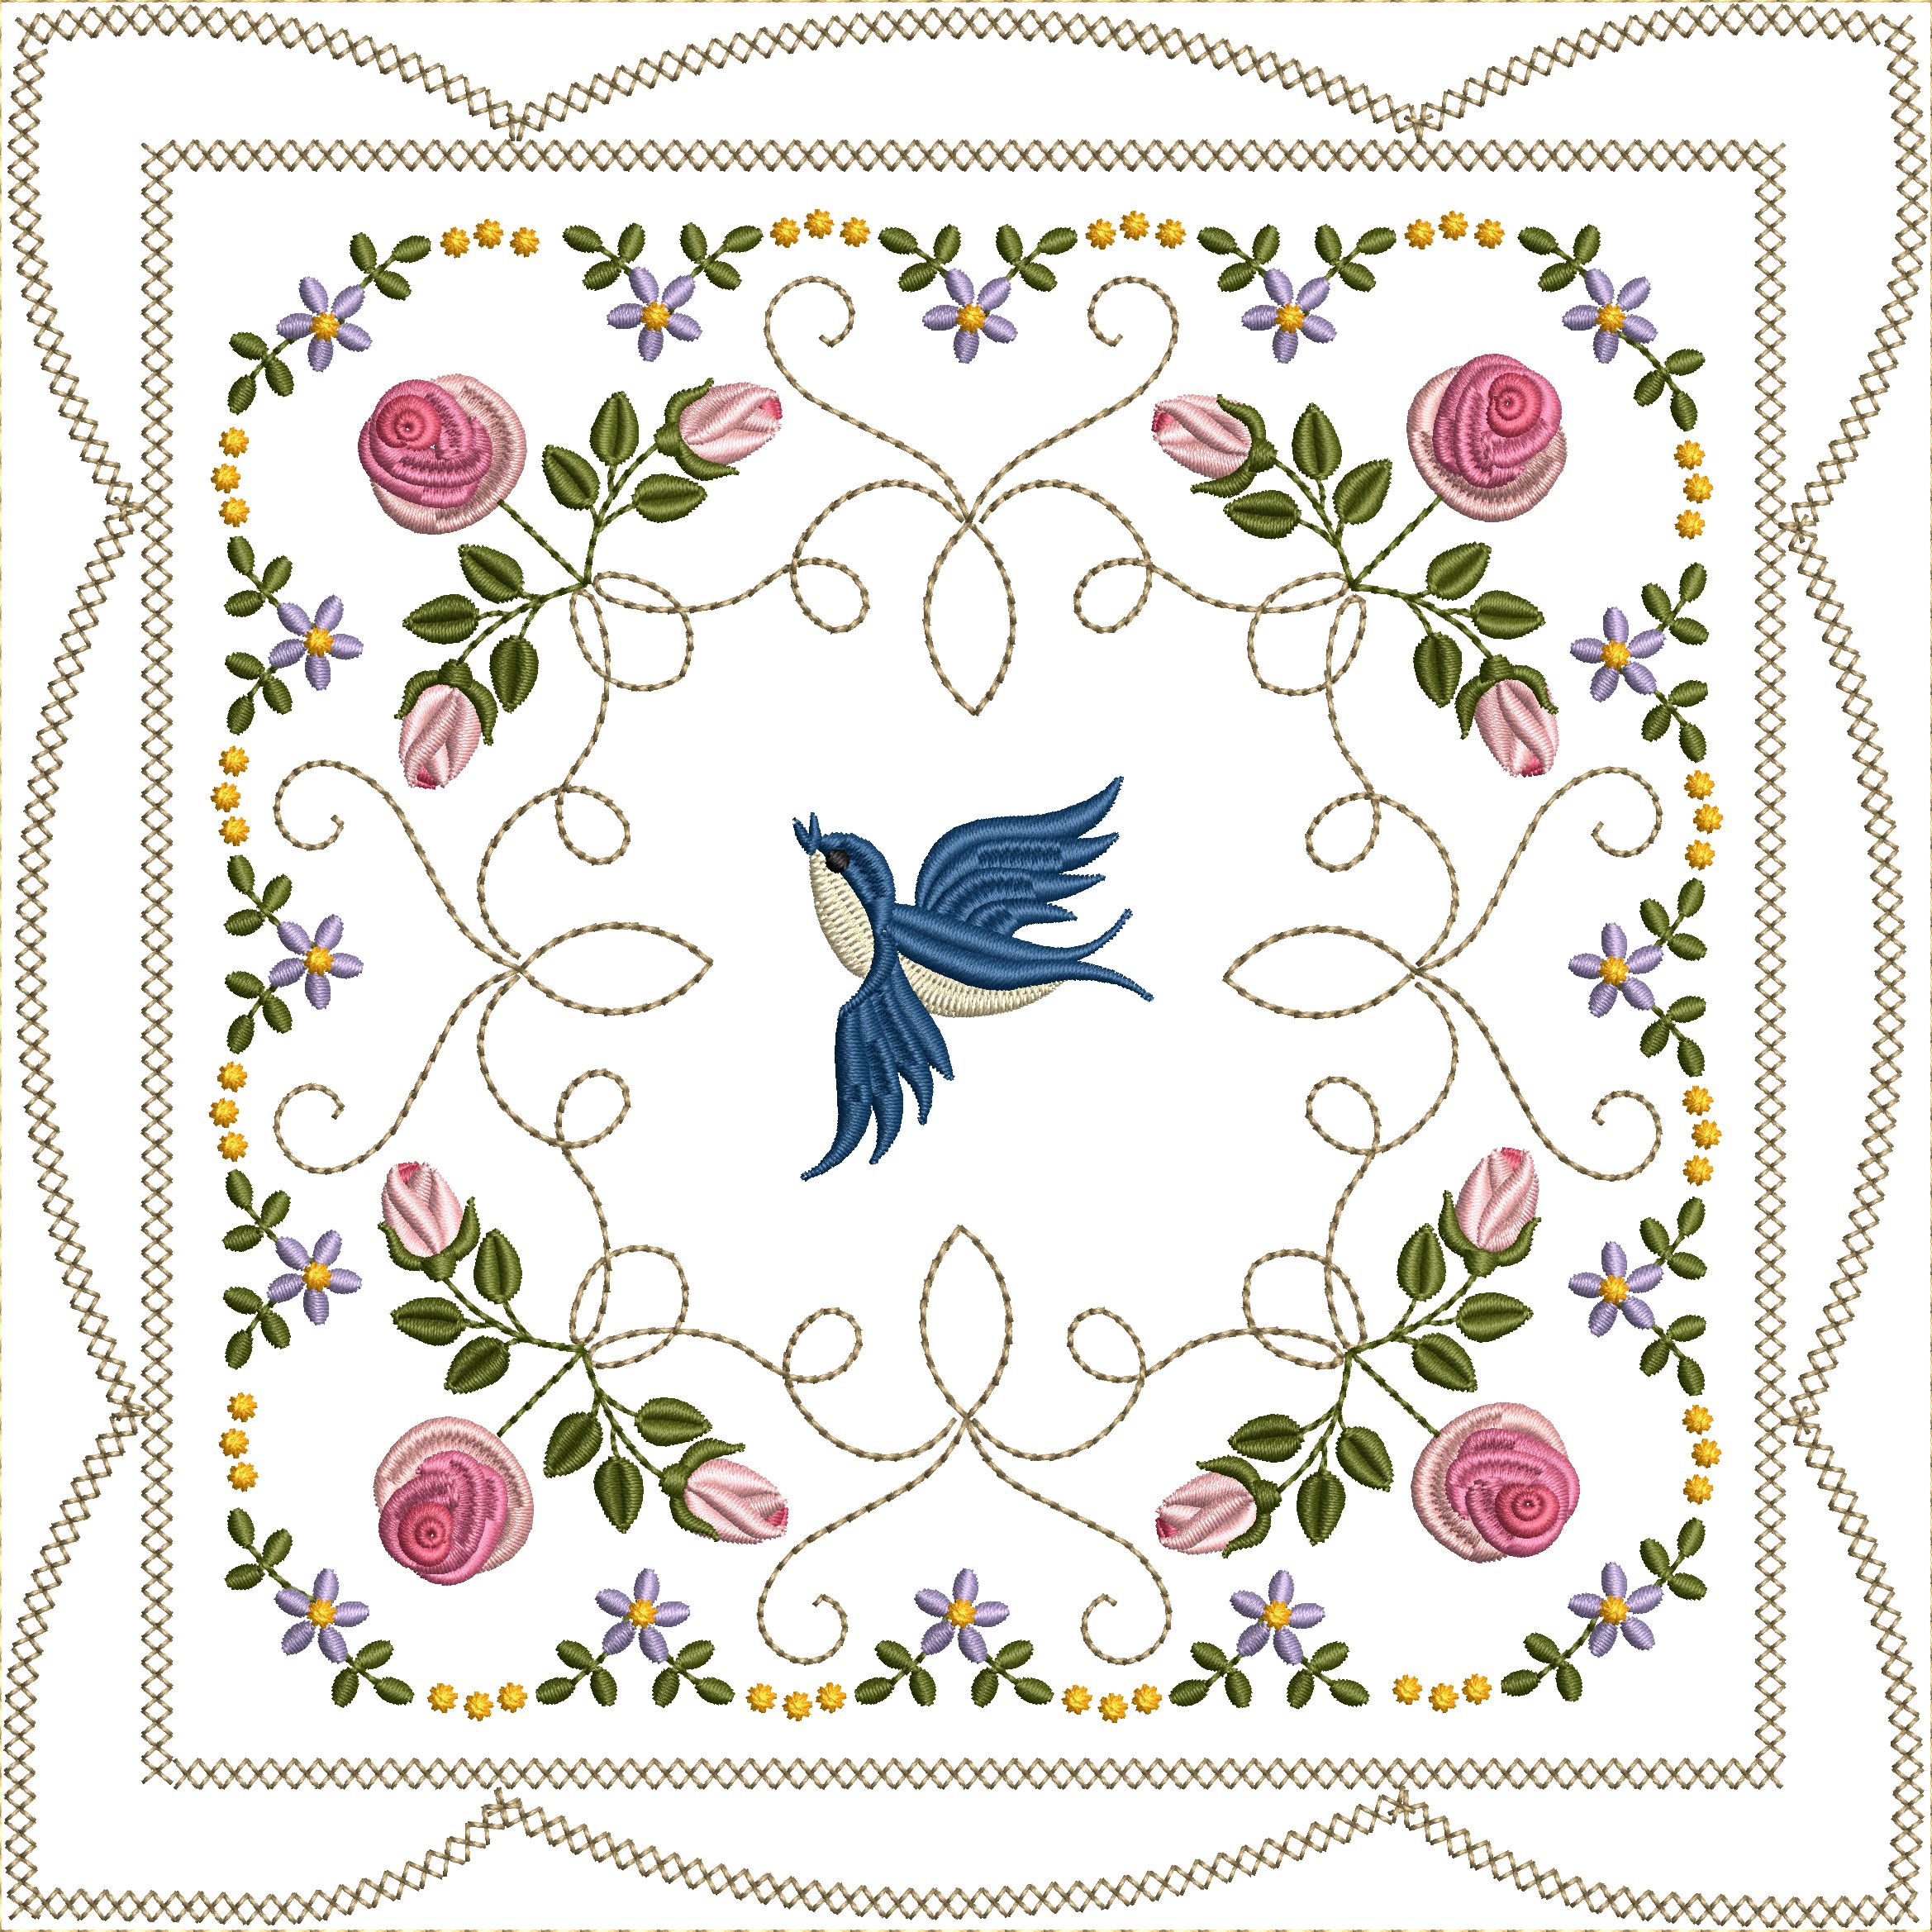 Bluebirds and Roses Quilt Blocks 8x8-16